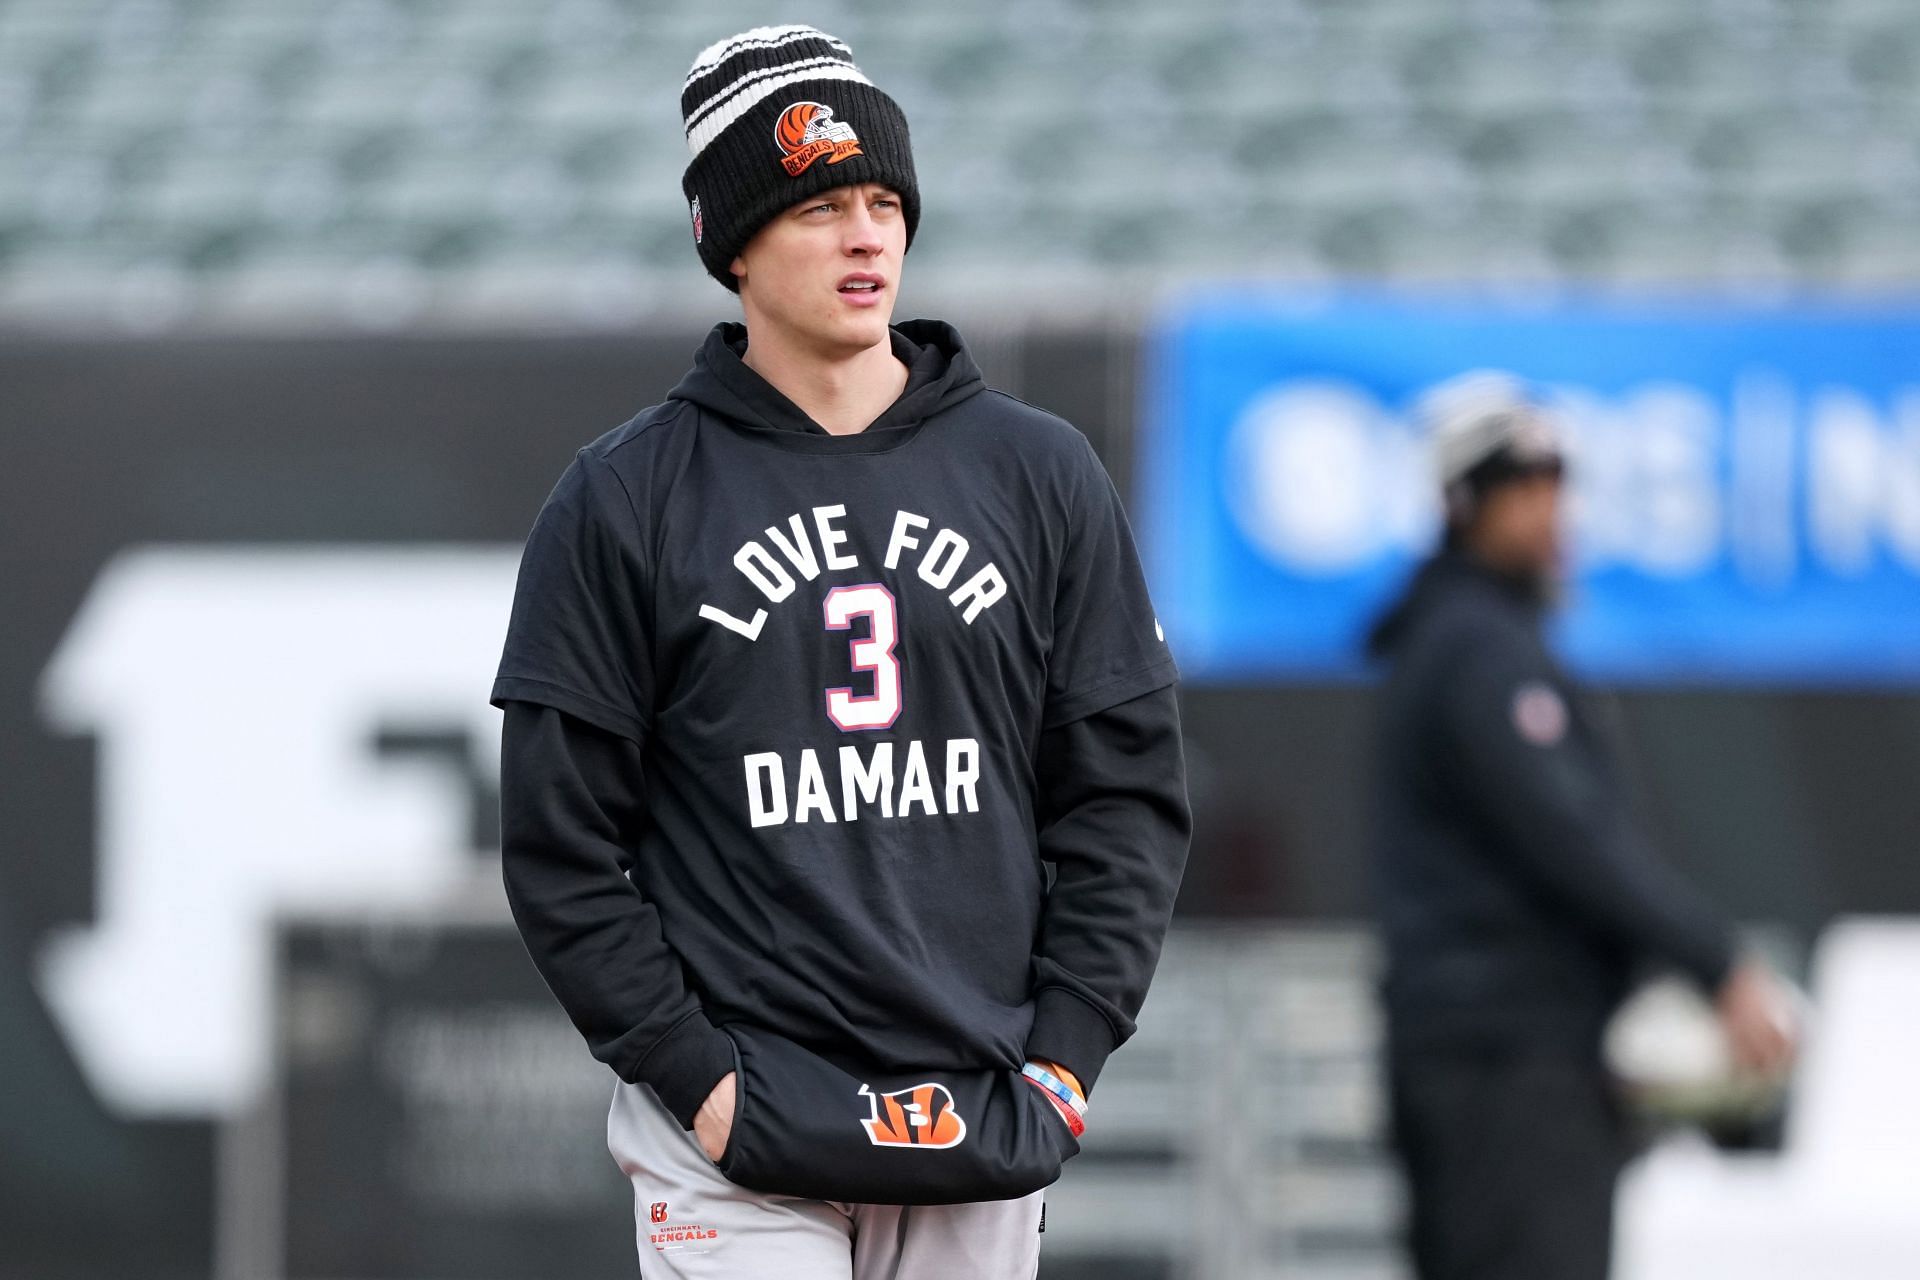 Joe Burrow's historic $275,000,000 deal leaves fans ridiculing Bengals QB -  “Overrated, overpaid”